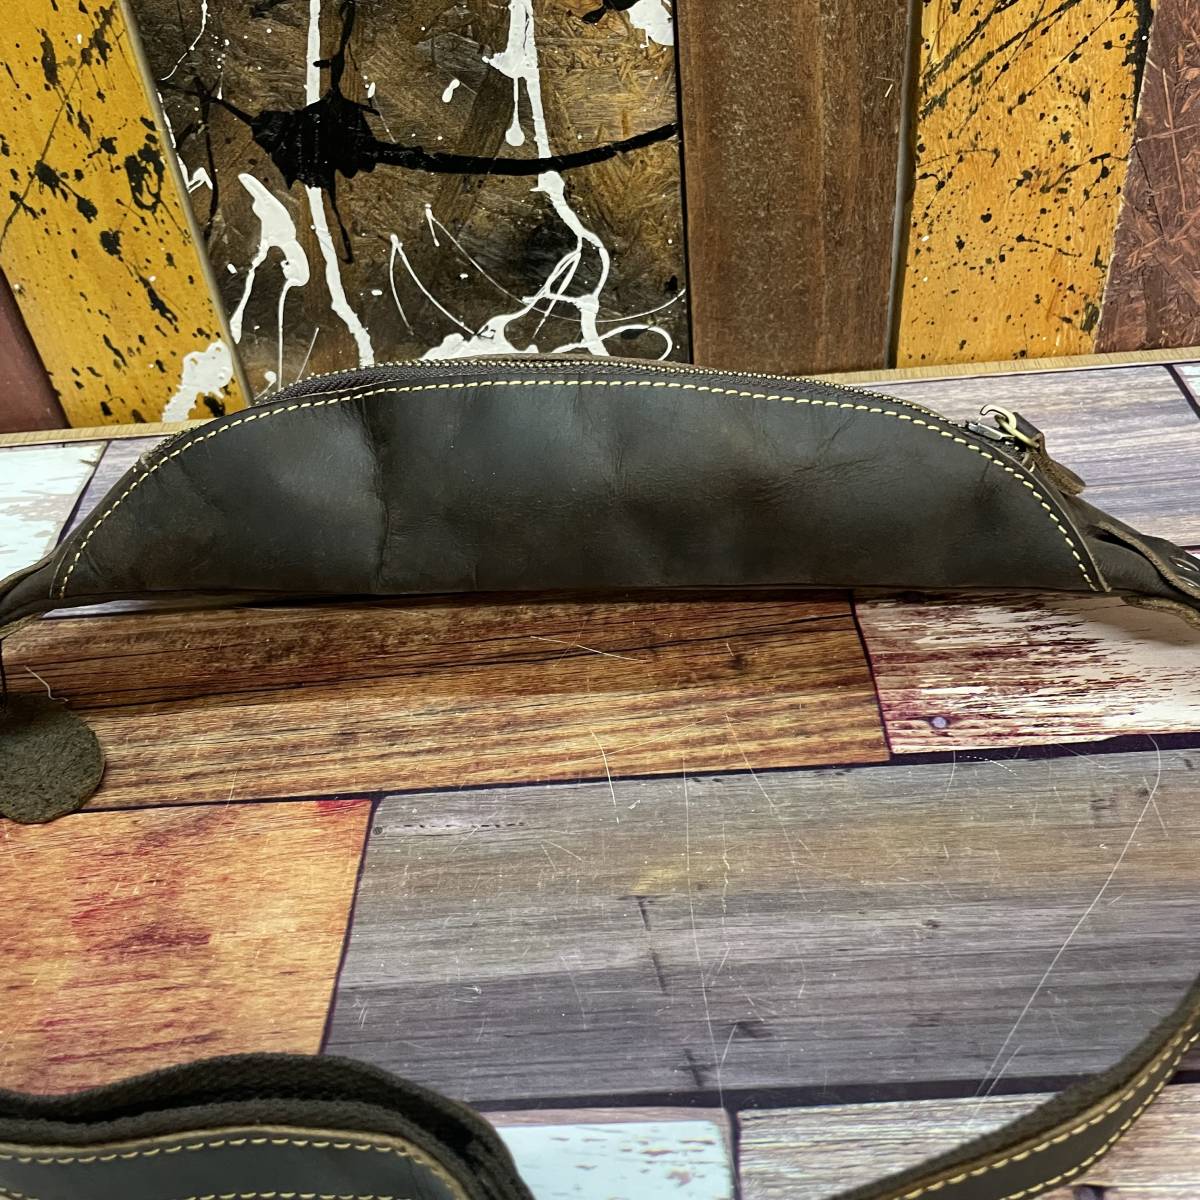  new goods cow leather leather three day month type body bag waist bag hip bag diagonal .. one shoulder dark brown scorching tea color passing of years change 2WAY